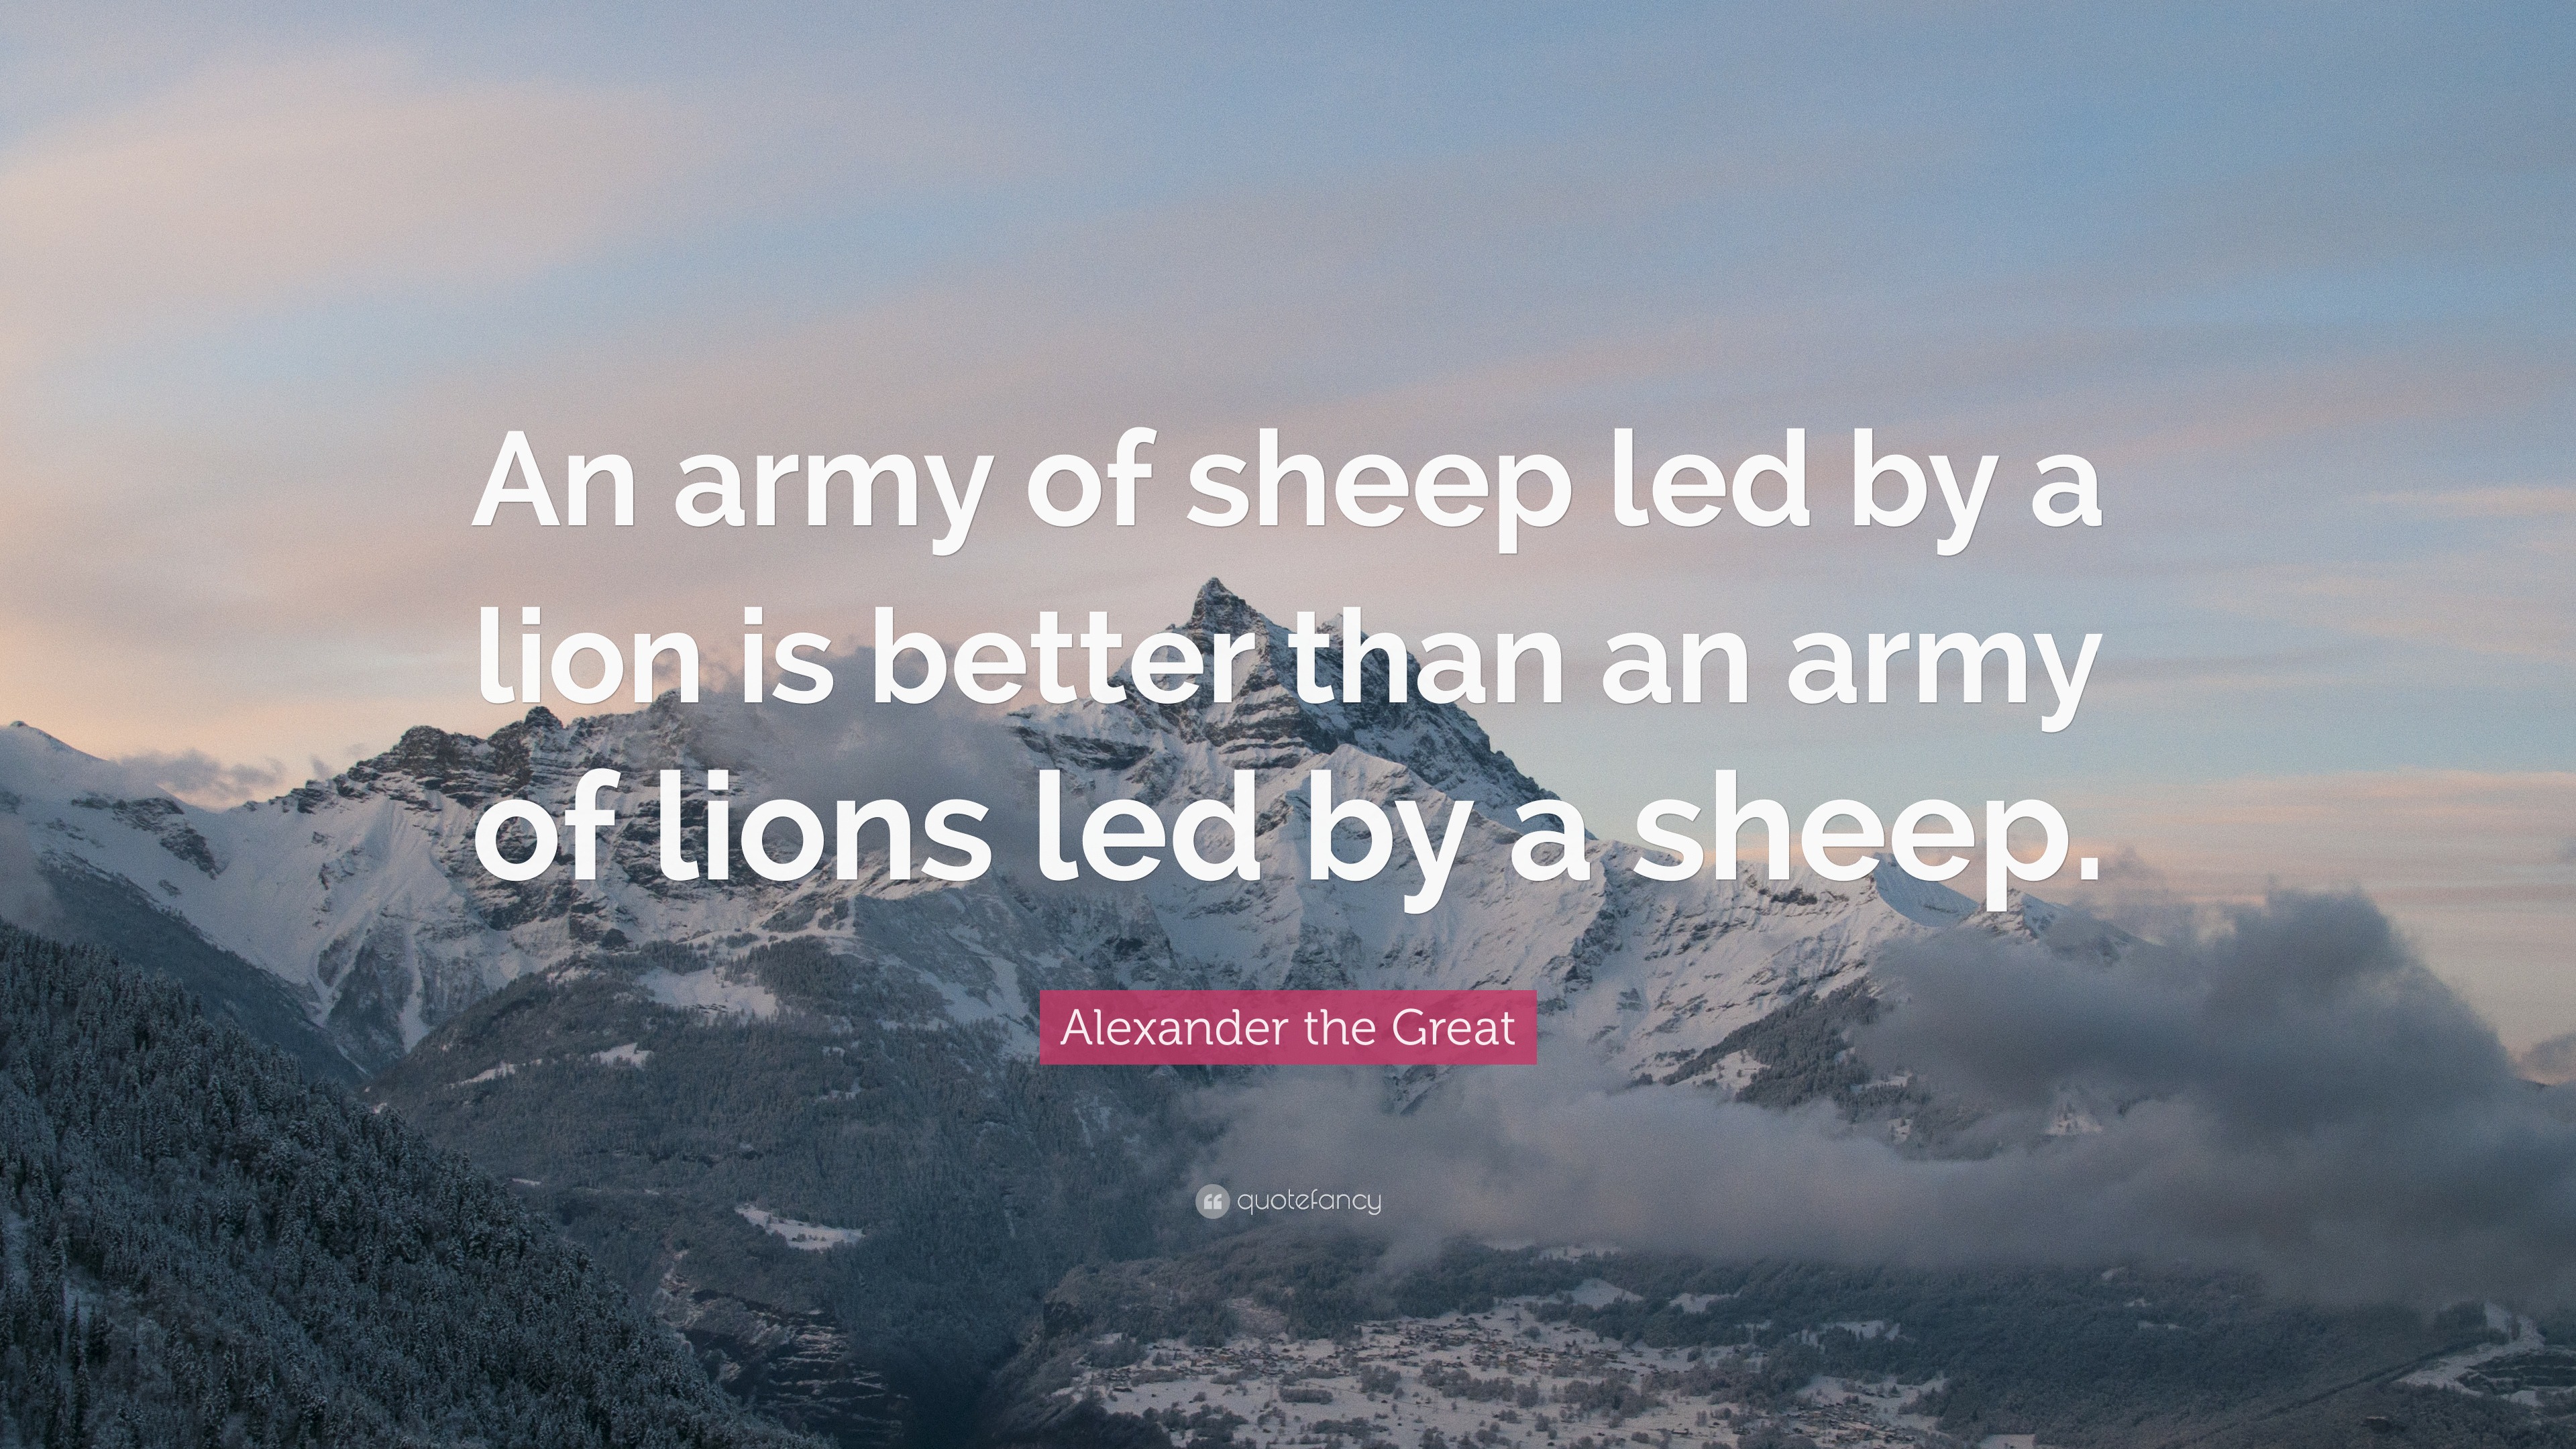 Alexander the Great Quote: “An army of led by a lion is better than an